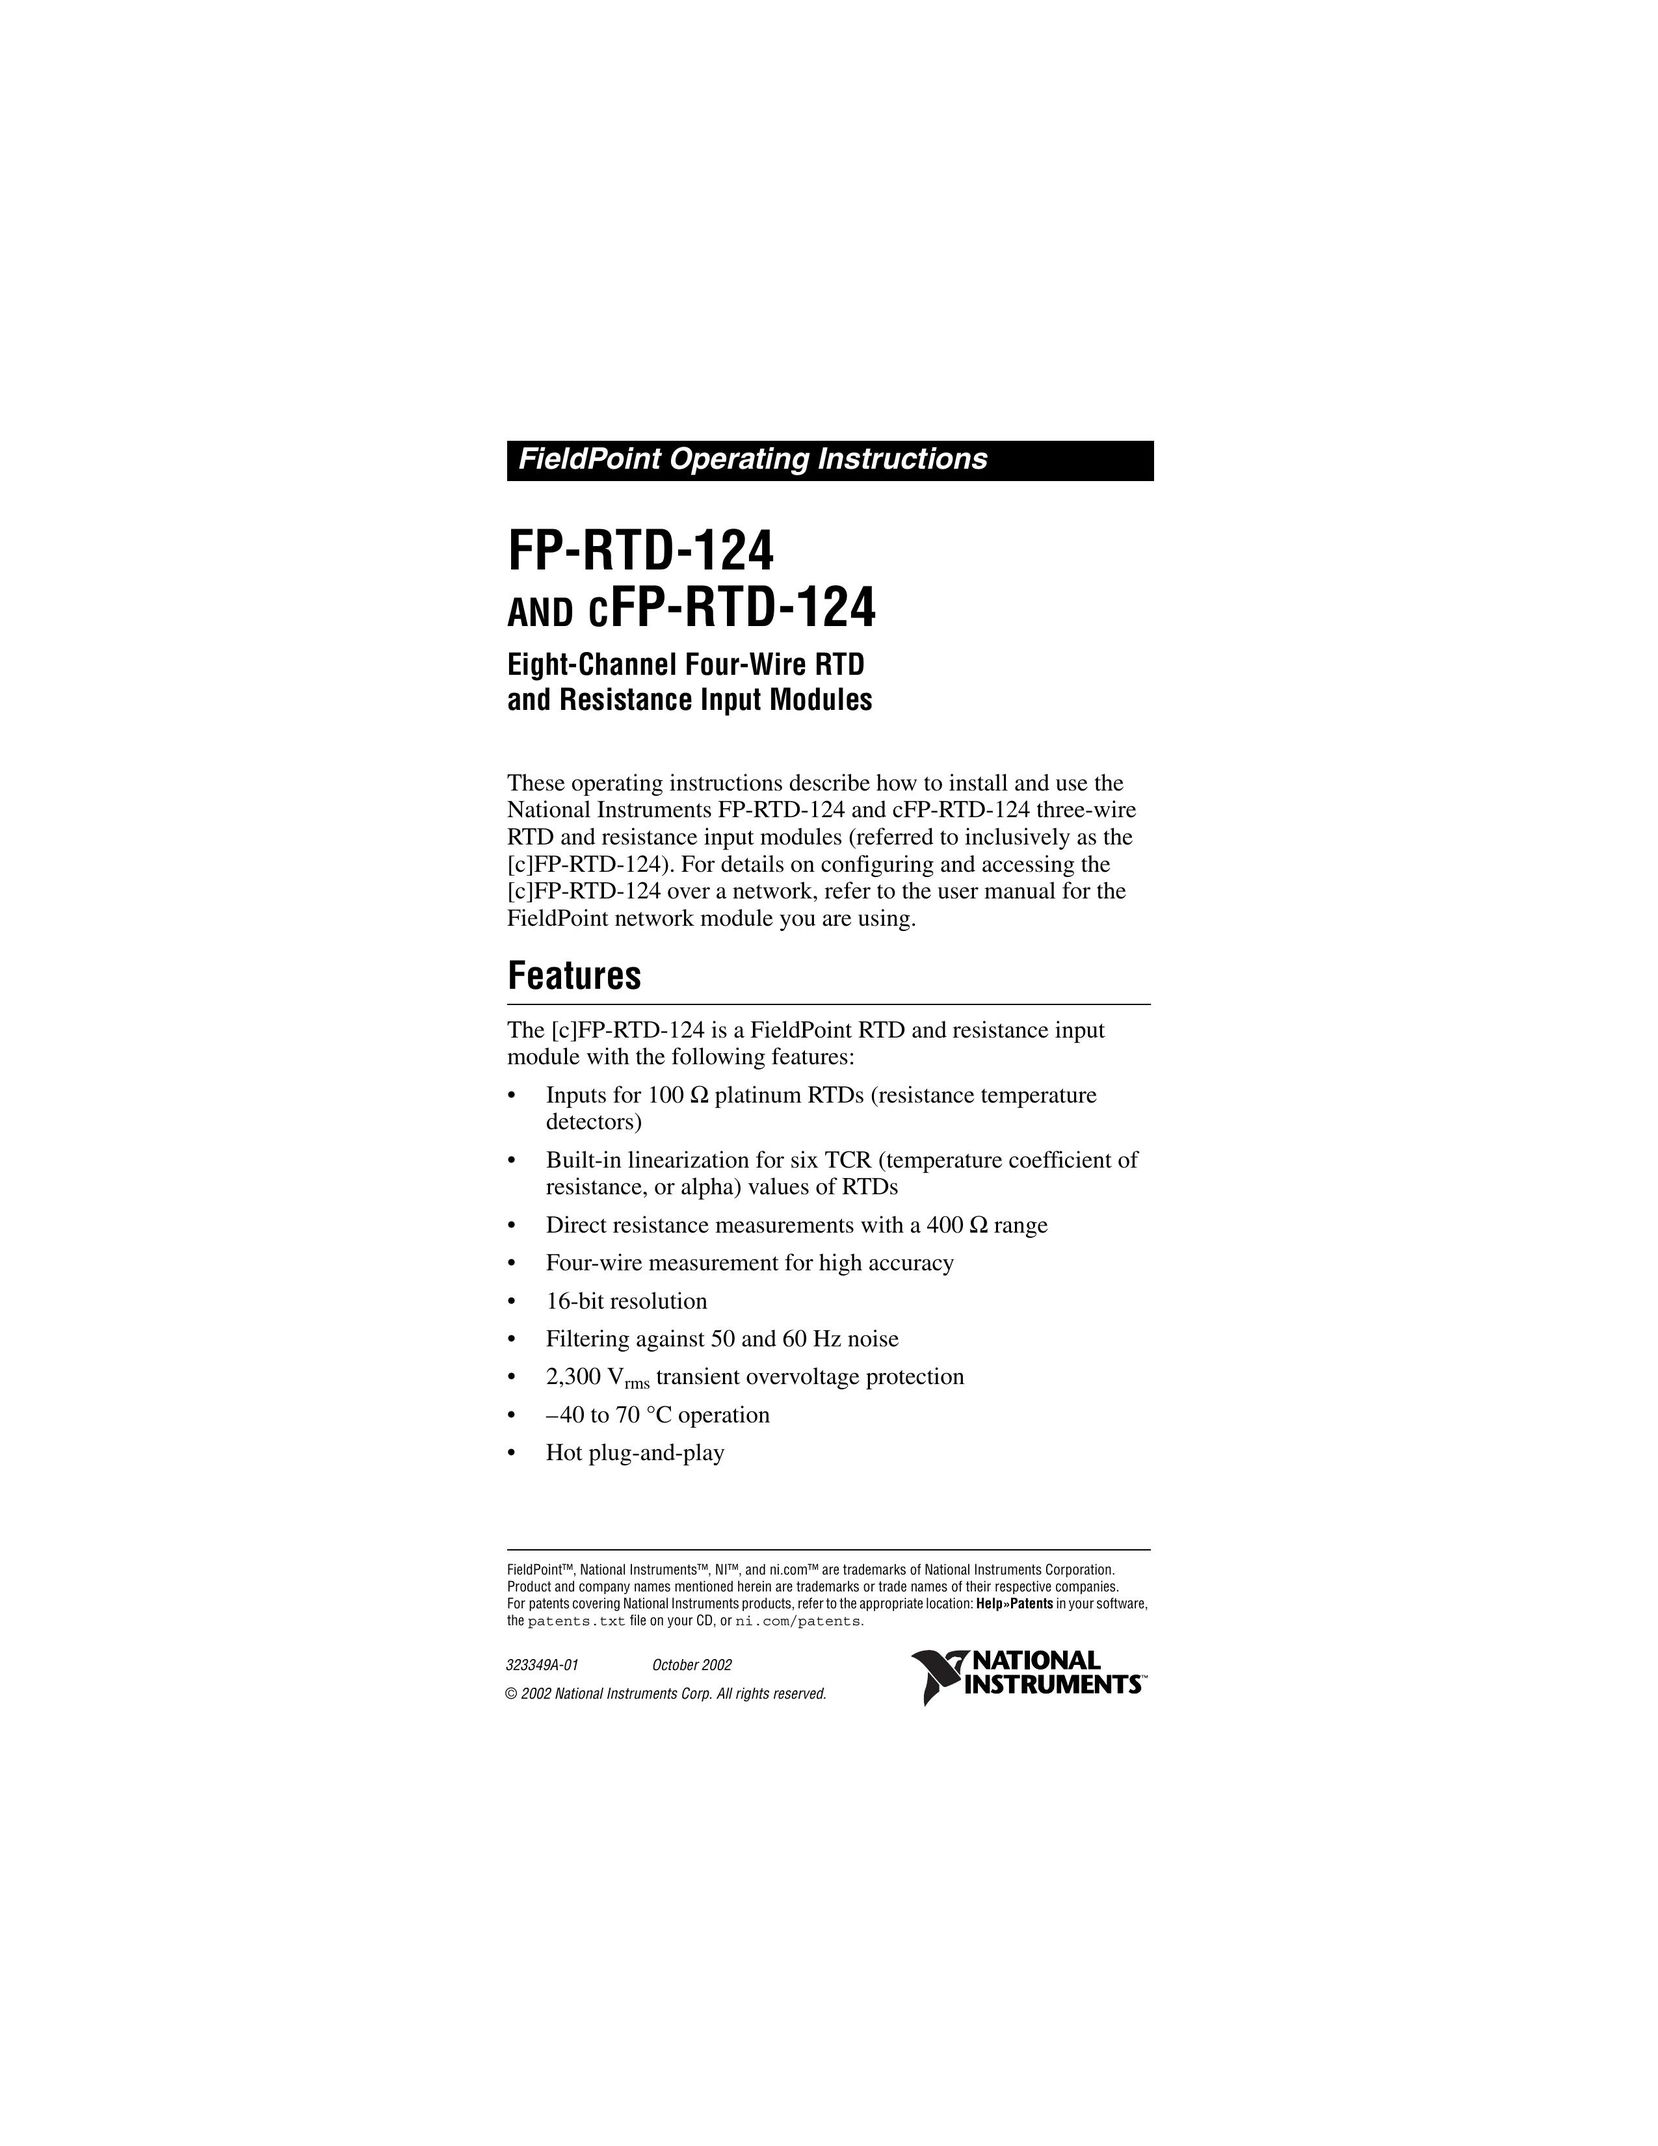 National Instruments cFP-RTD-124 Network Router User Manual